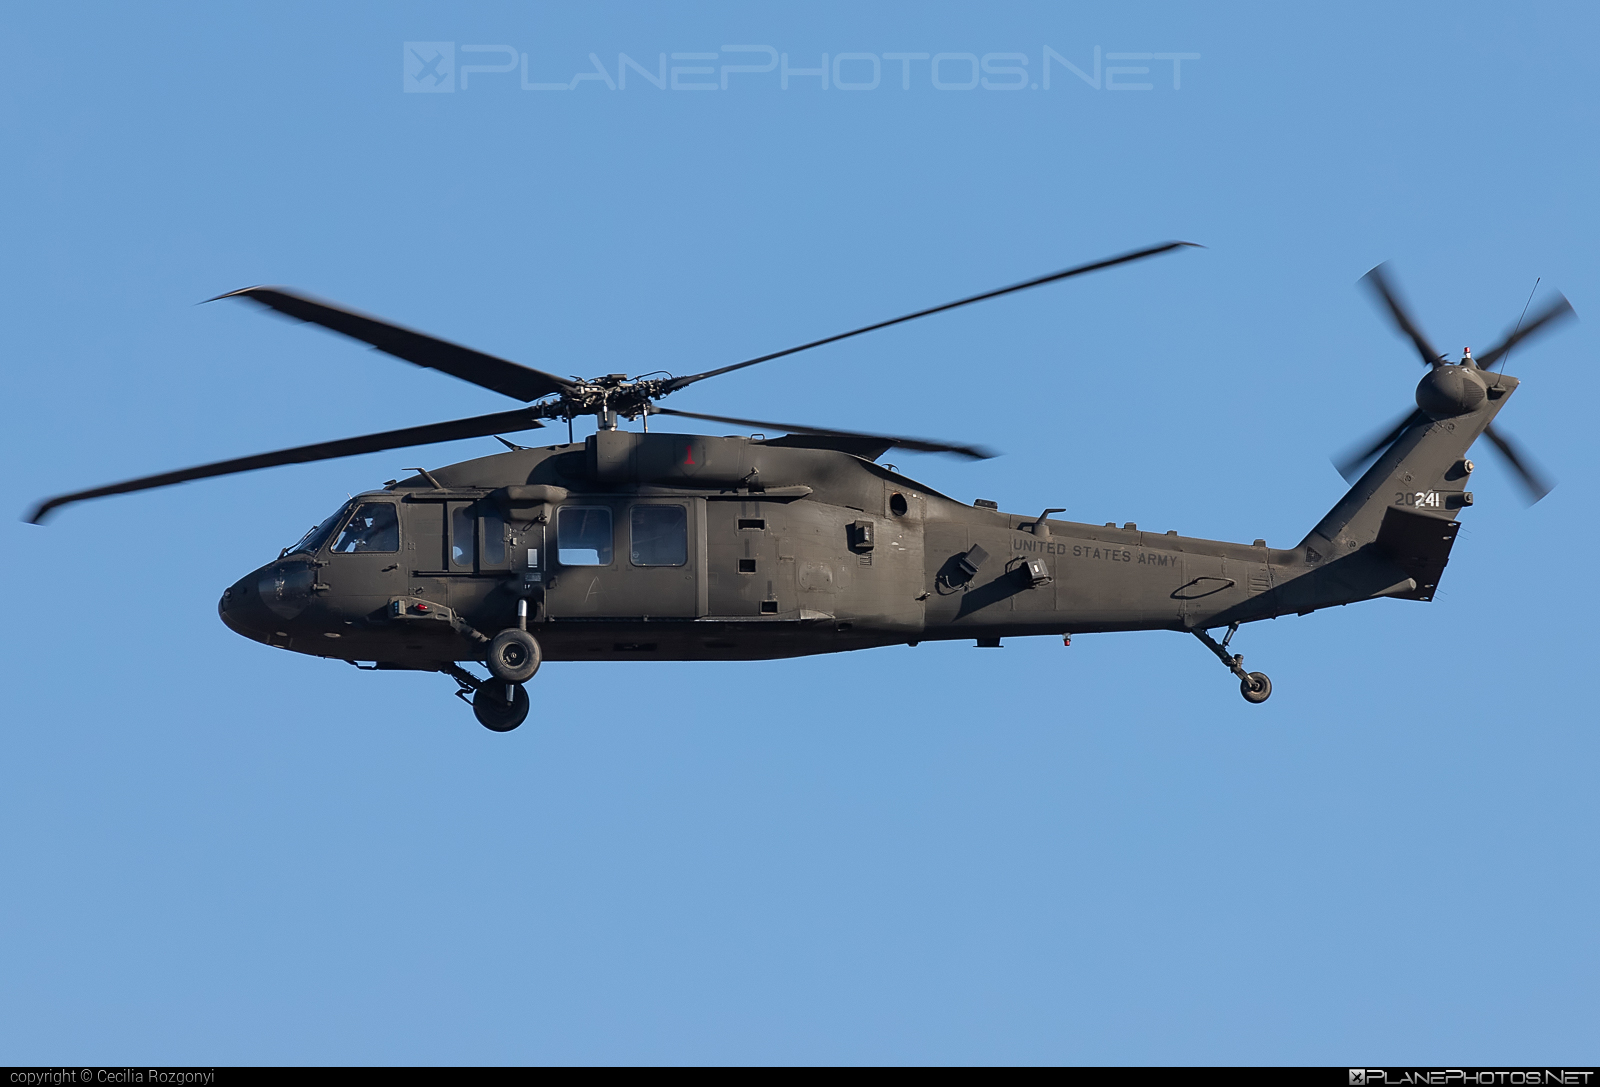 Sikorsky HH-60M Black Hawk - 10-20241 operated by US Army #blackhawk #hh60 #hh60blackhawk #hh60m #sikorsky #usarmy